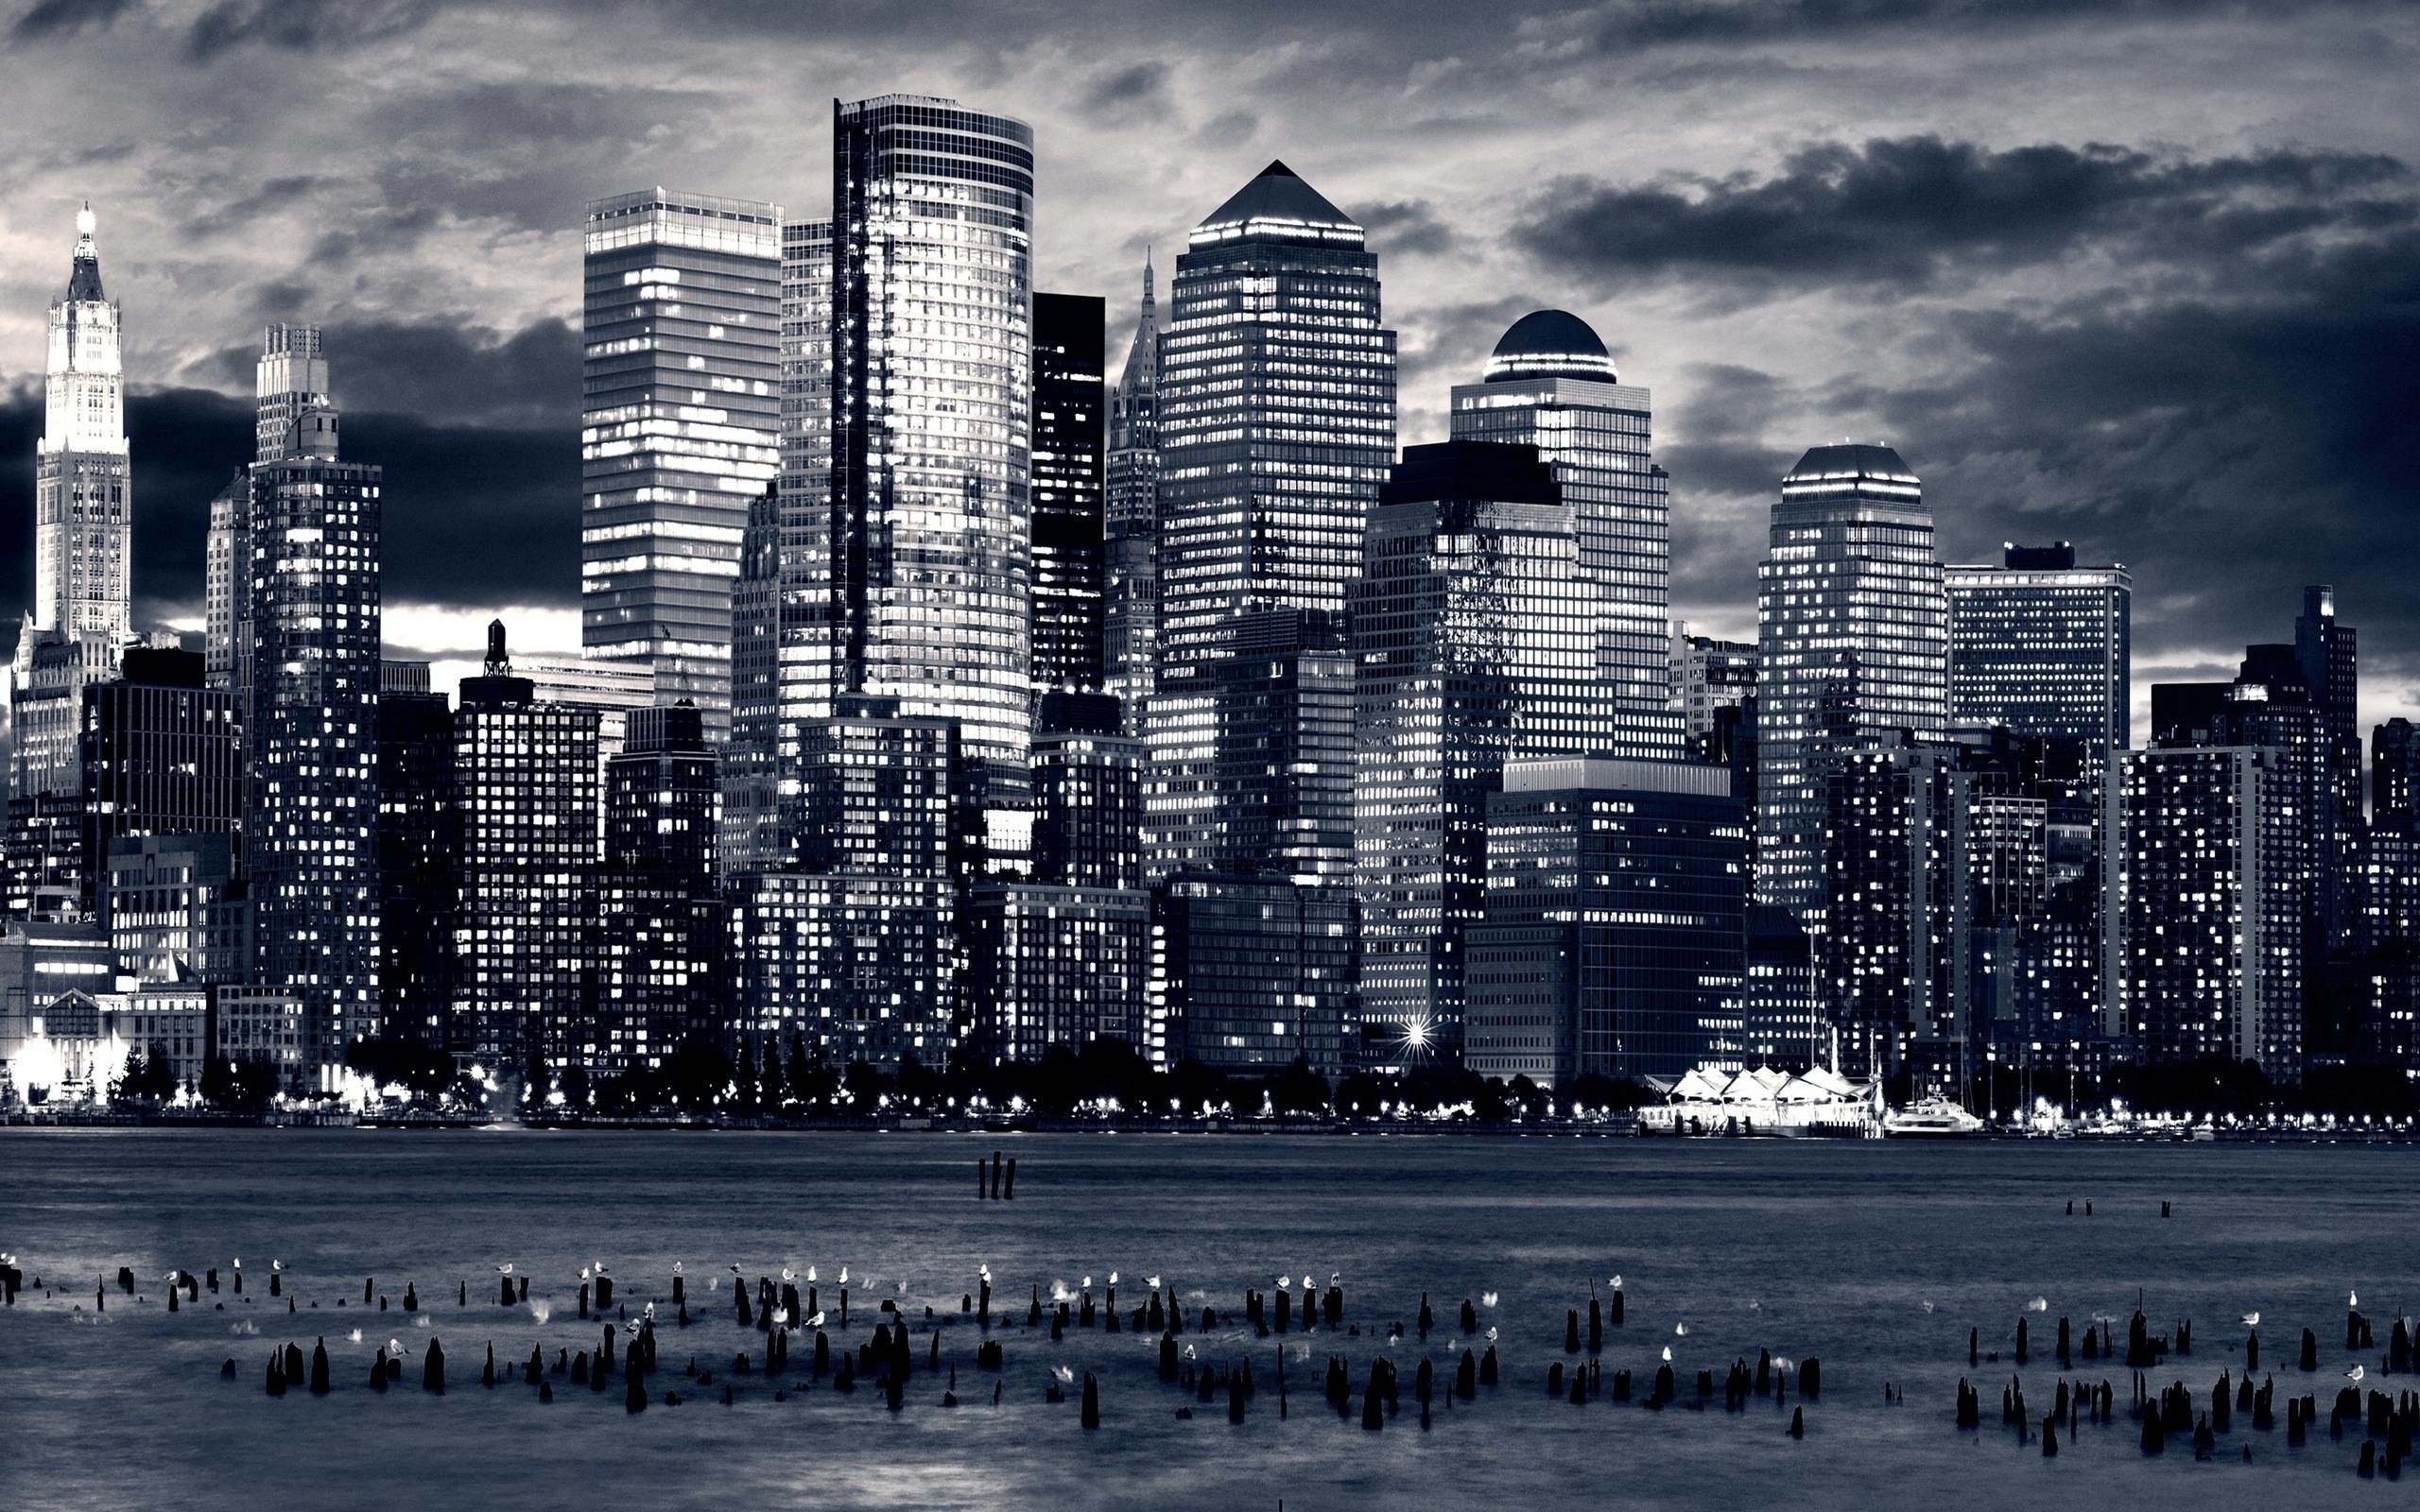 10 New Black City Wallpaper Hd FULL HD 1920×1080 For PC Background 2021